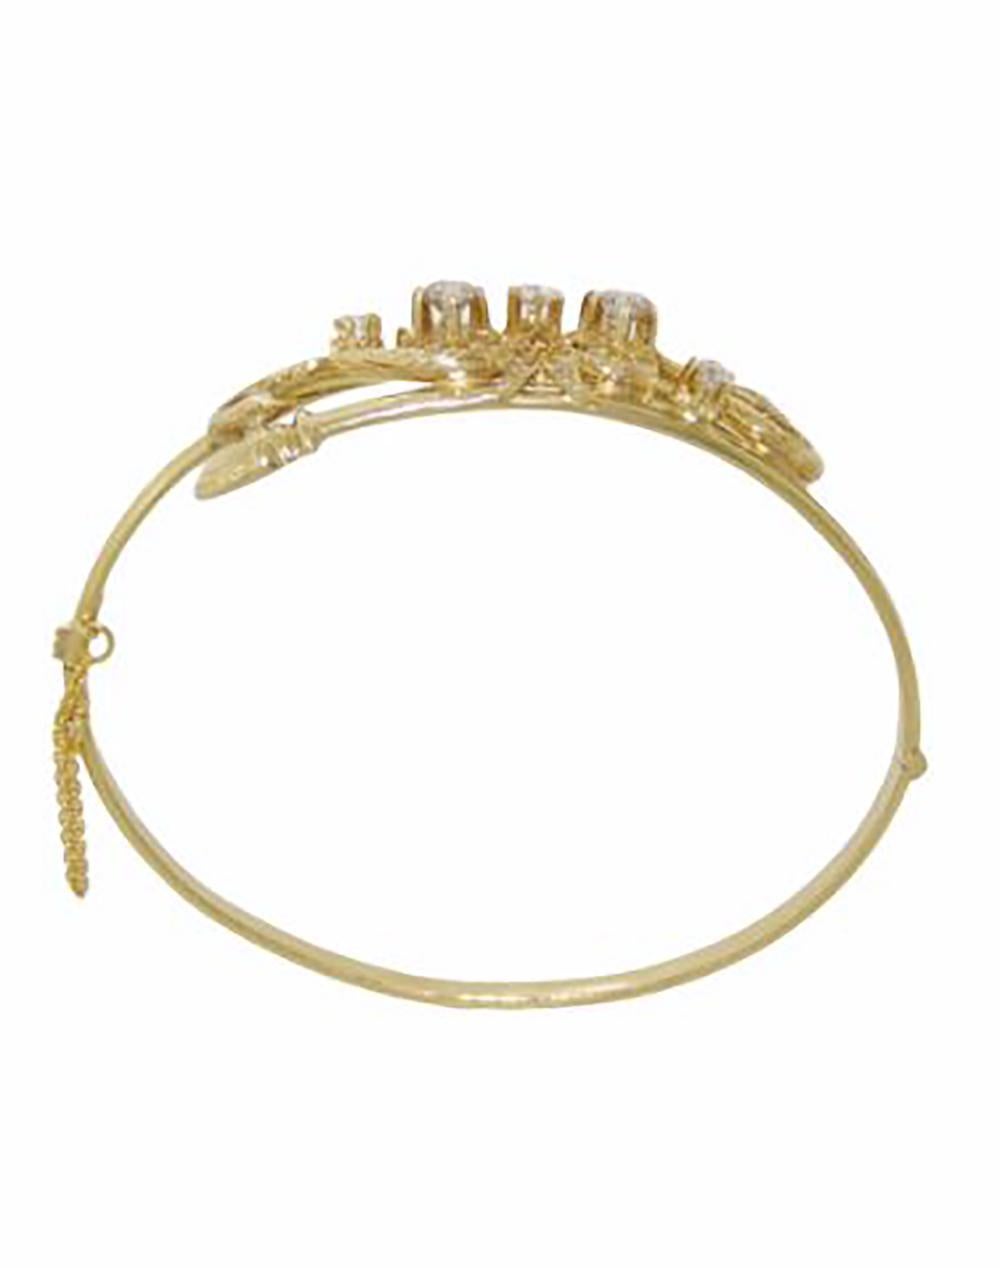 Vintage 18k Yellow Gold Diamond Bangle Bracelet In Excellent Condition For Sale In Dania Beach, FL